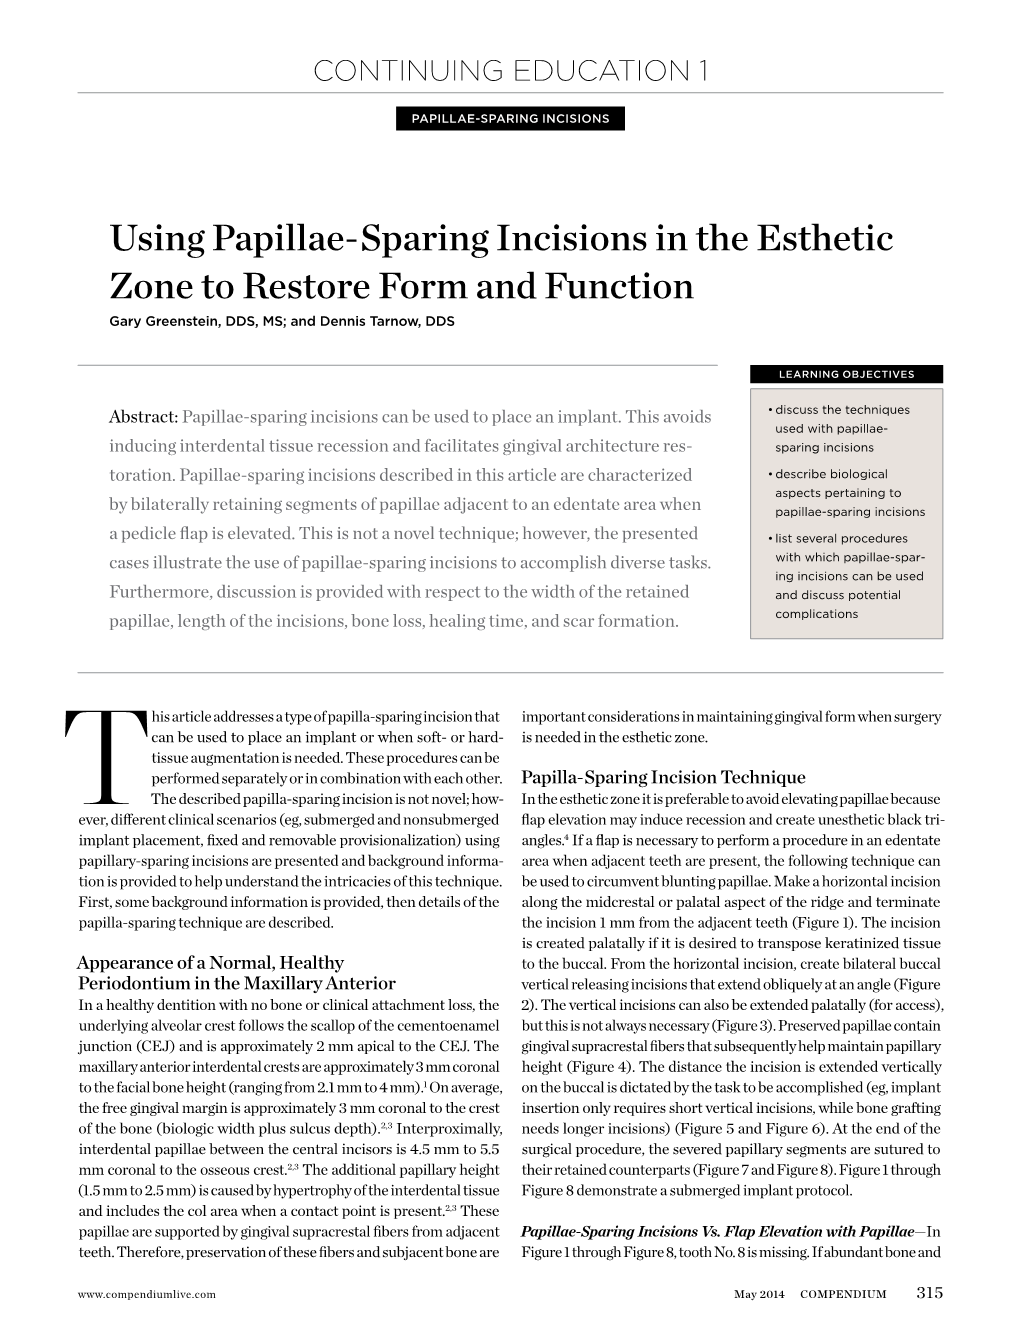 Using Papillae-Sparing Incisions in the Esthetic Zone to Restore Form and Function Gary Greenstein, DDS, MS; and Dennis Tarnow, DDS